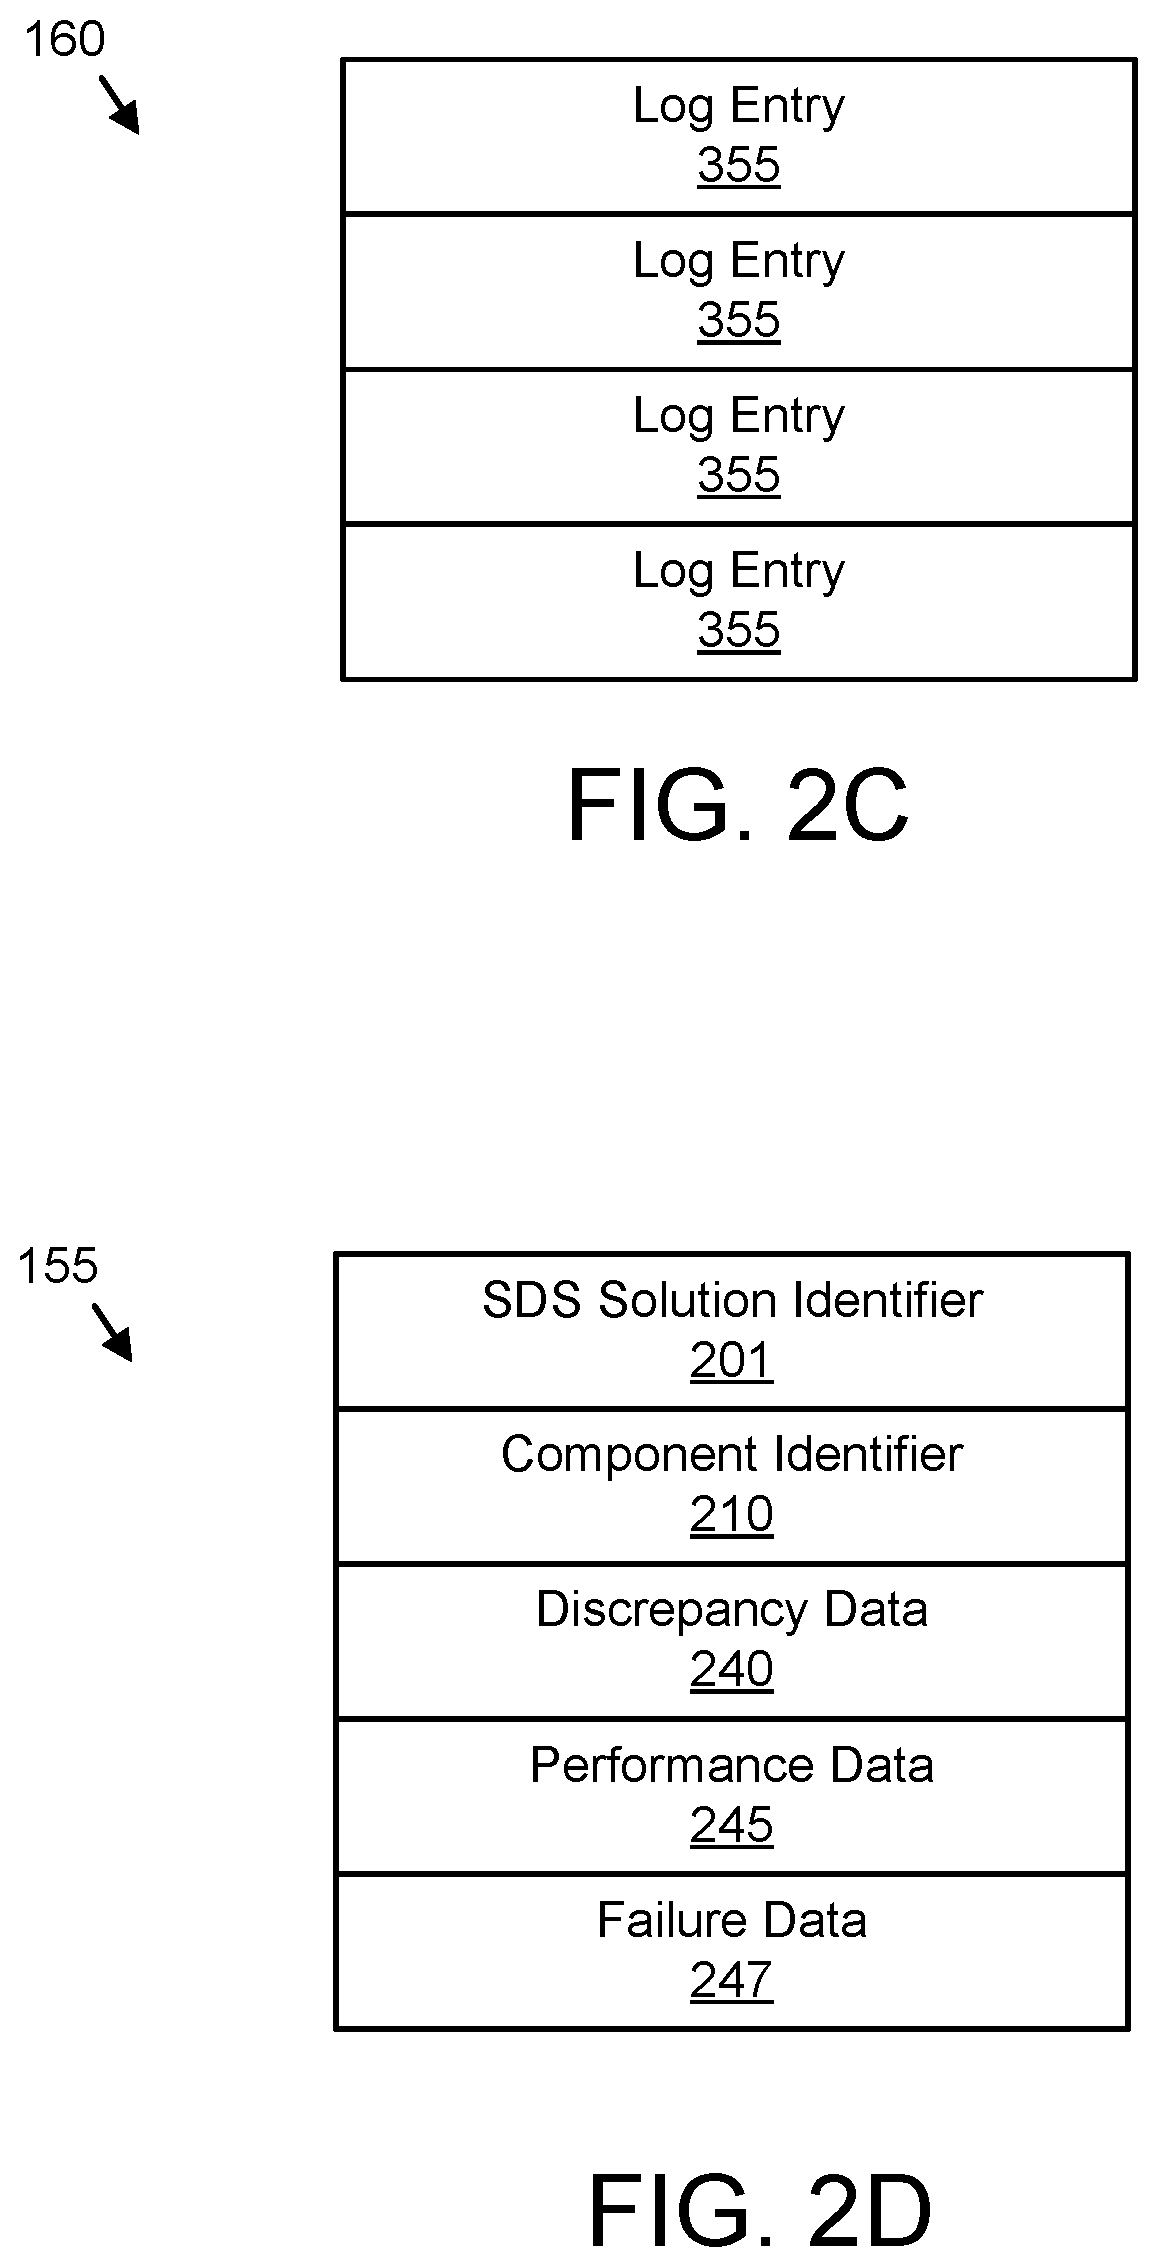 Validating a software defined storage solution based on field data